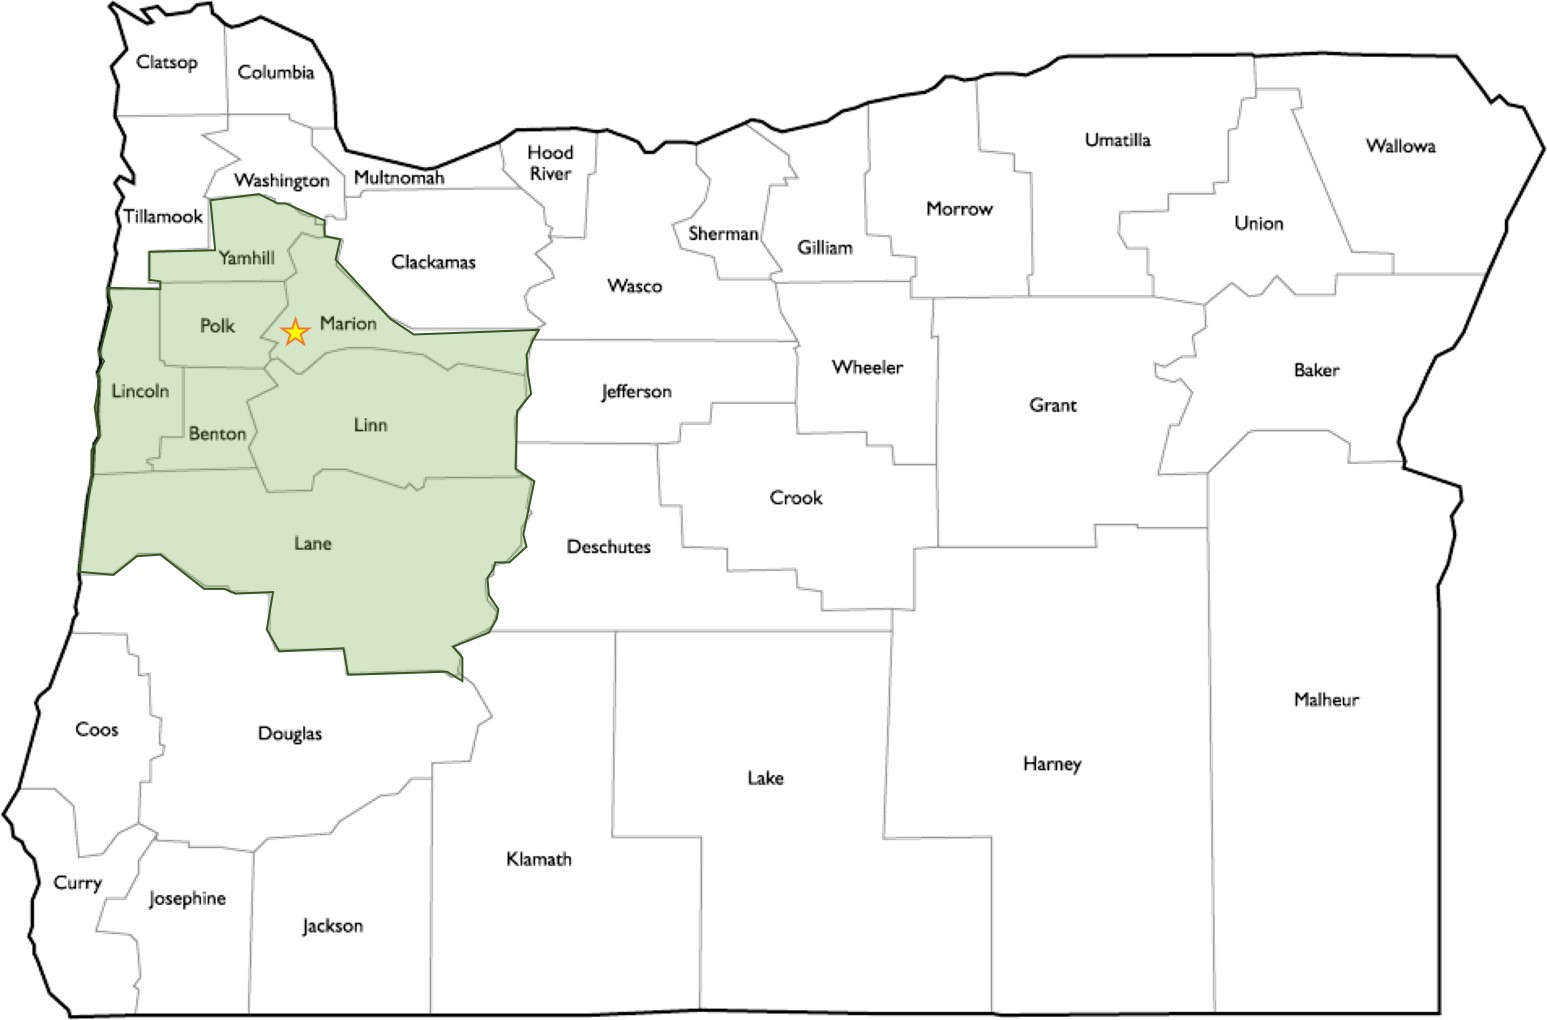 Map showing the Willamette valley and central coast region of Oregon